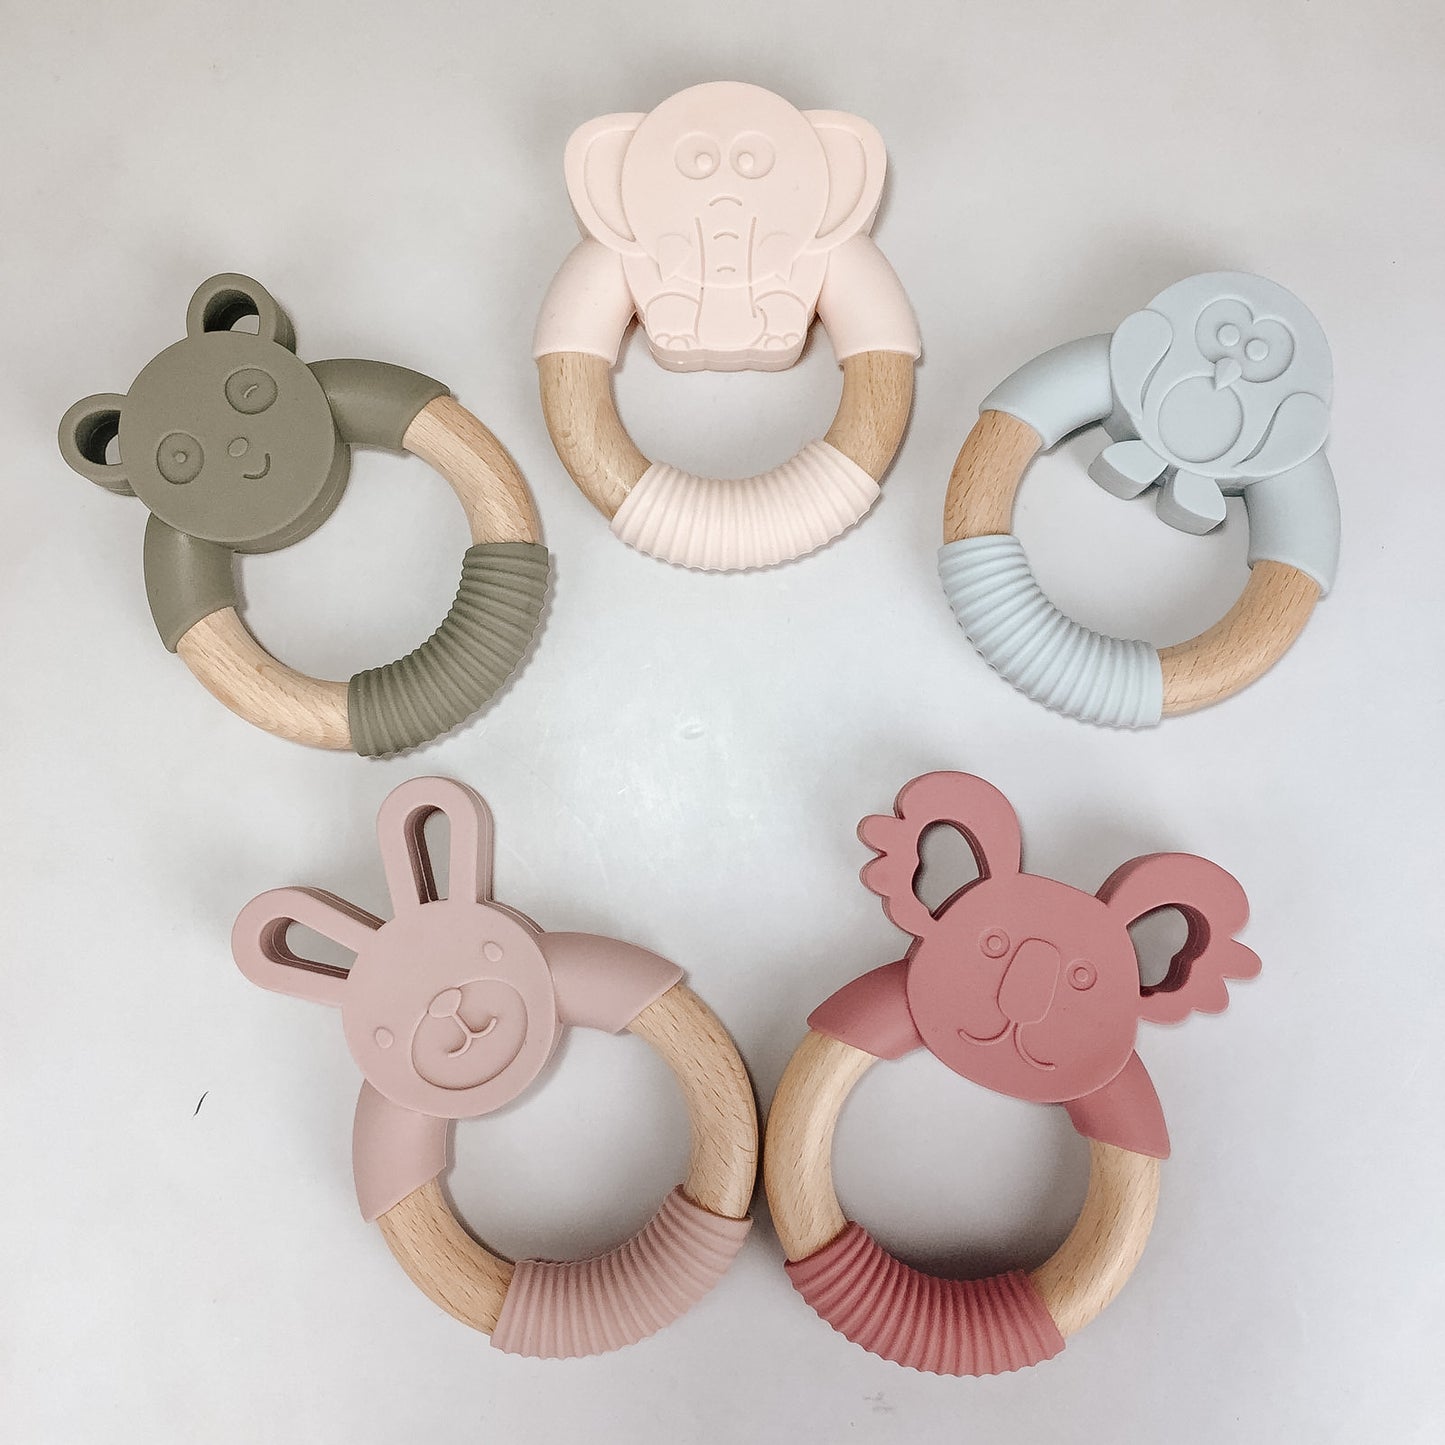 Silicone and Wood Animal Teether